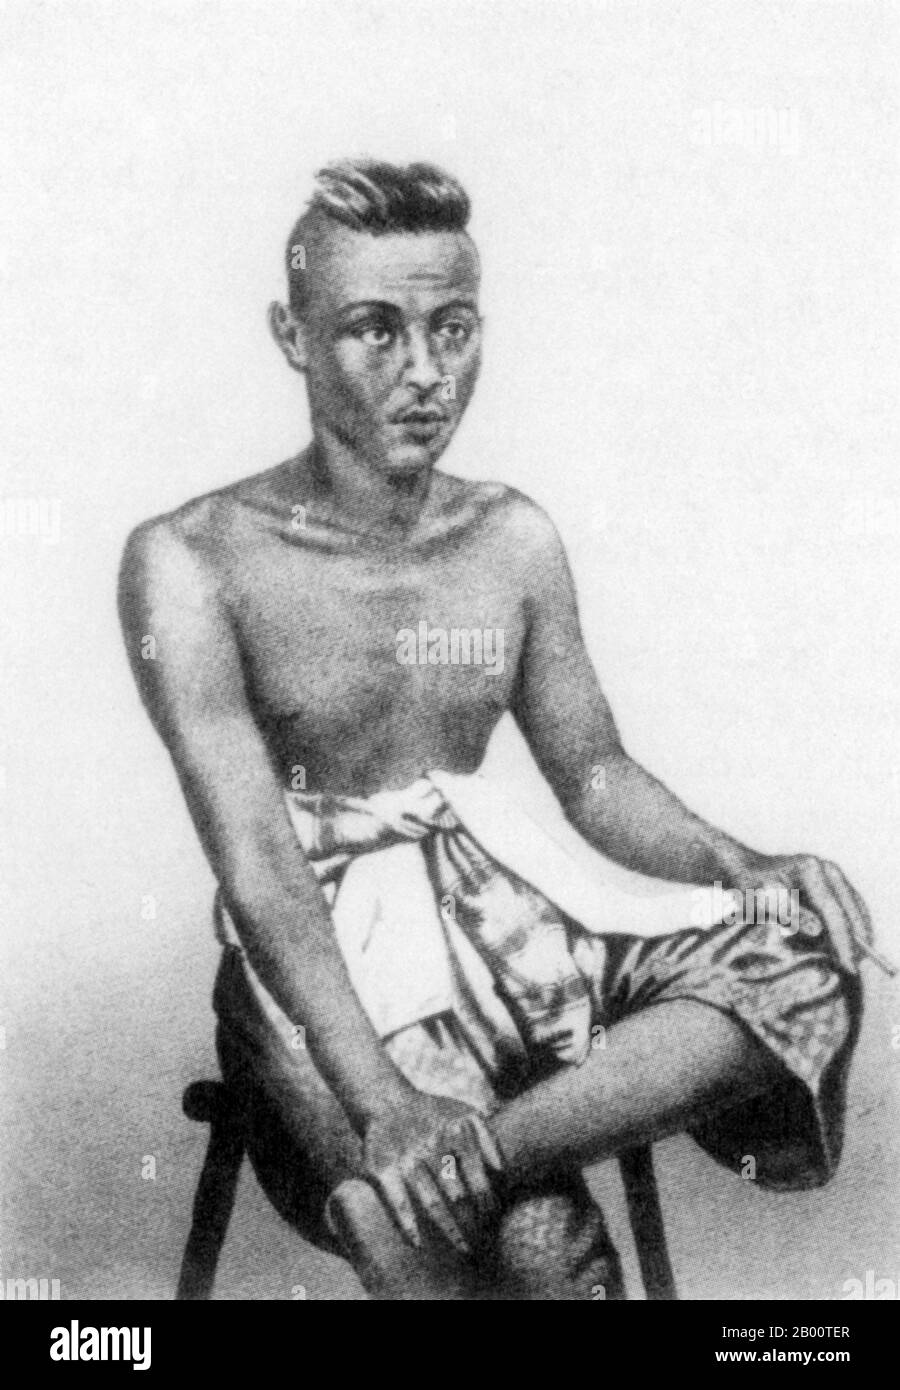 Thailand: A pencil sketch from the mid-19th century of a Siamese official. Drawing by M. & N. Hanhart (1839-1888).  In this drawing, the official or courtier sports the traditional hairstyle of the times.  The Siamese, or Thais, moved from their ancestral home in southern China into mainland Southeast Asia around the 10th century CE. Prior to this, Indianized kingdoms such as the Mon, Khmer and Malay kingdoms ruled the region. The Thais established their own states starting with Sukhothai, Chiang Saen, Chiang Mai and Lanna Kingdom, before the founding of the Ayutthaya kingdom. Stock Photo